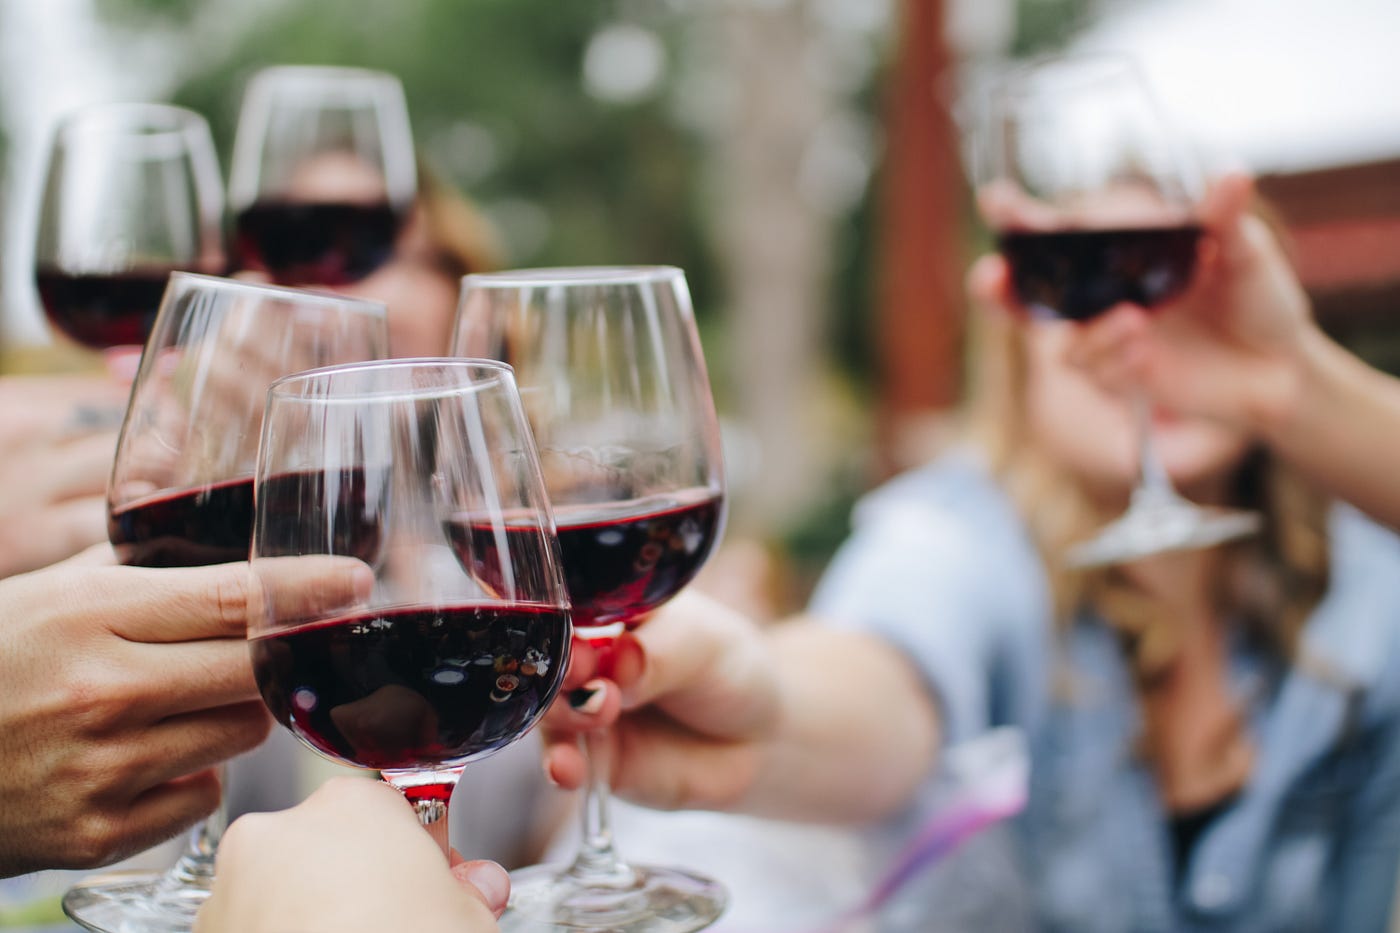 Several hands raise glasses of white wine. We cannot see the individuals otherwise. Alcohol’s dehydrating effects can cause headaches. As you consume your glass of red wine, you may lose more fluids than you gain.